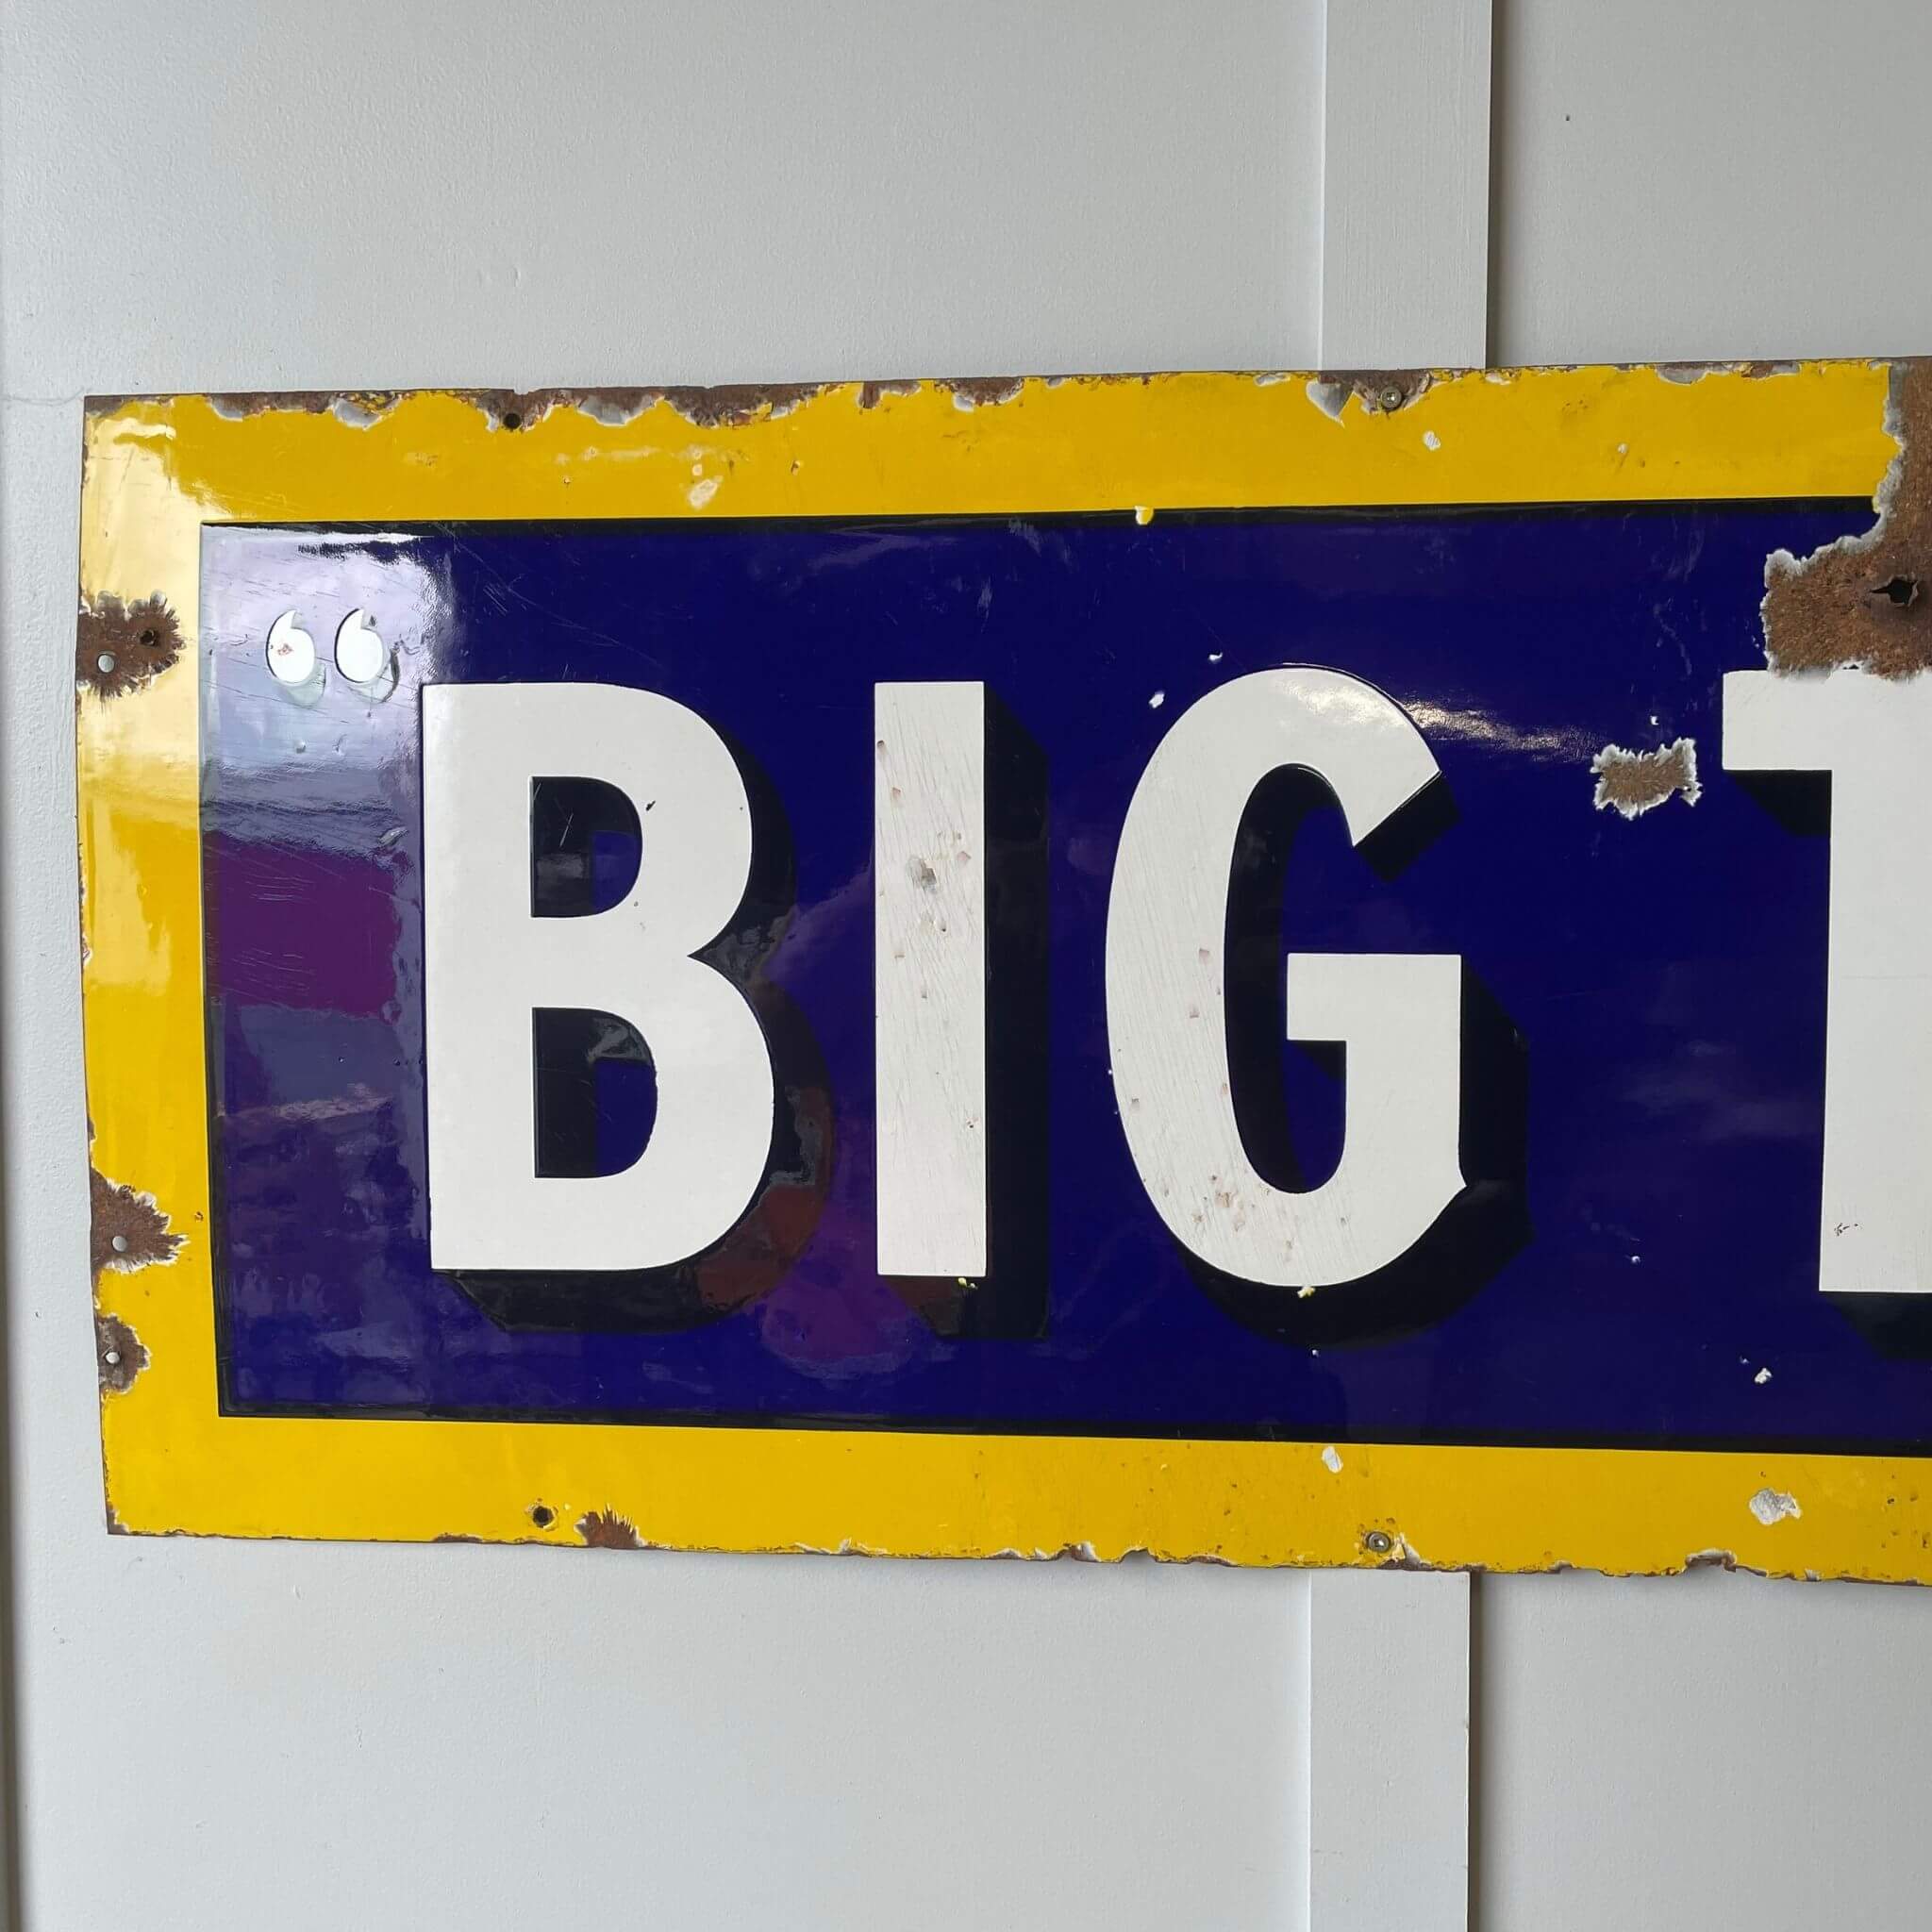 Blue and yellow enamel sign